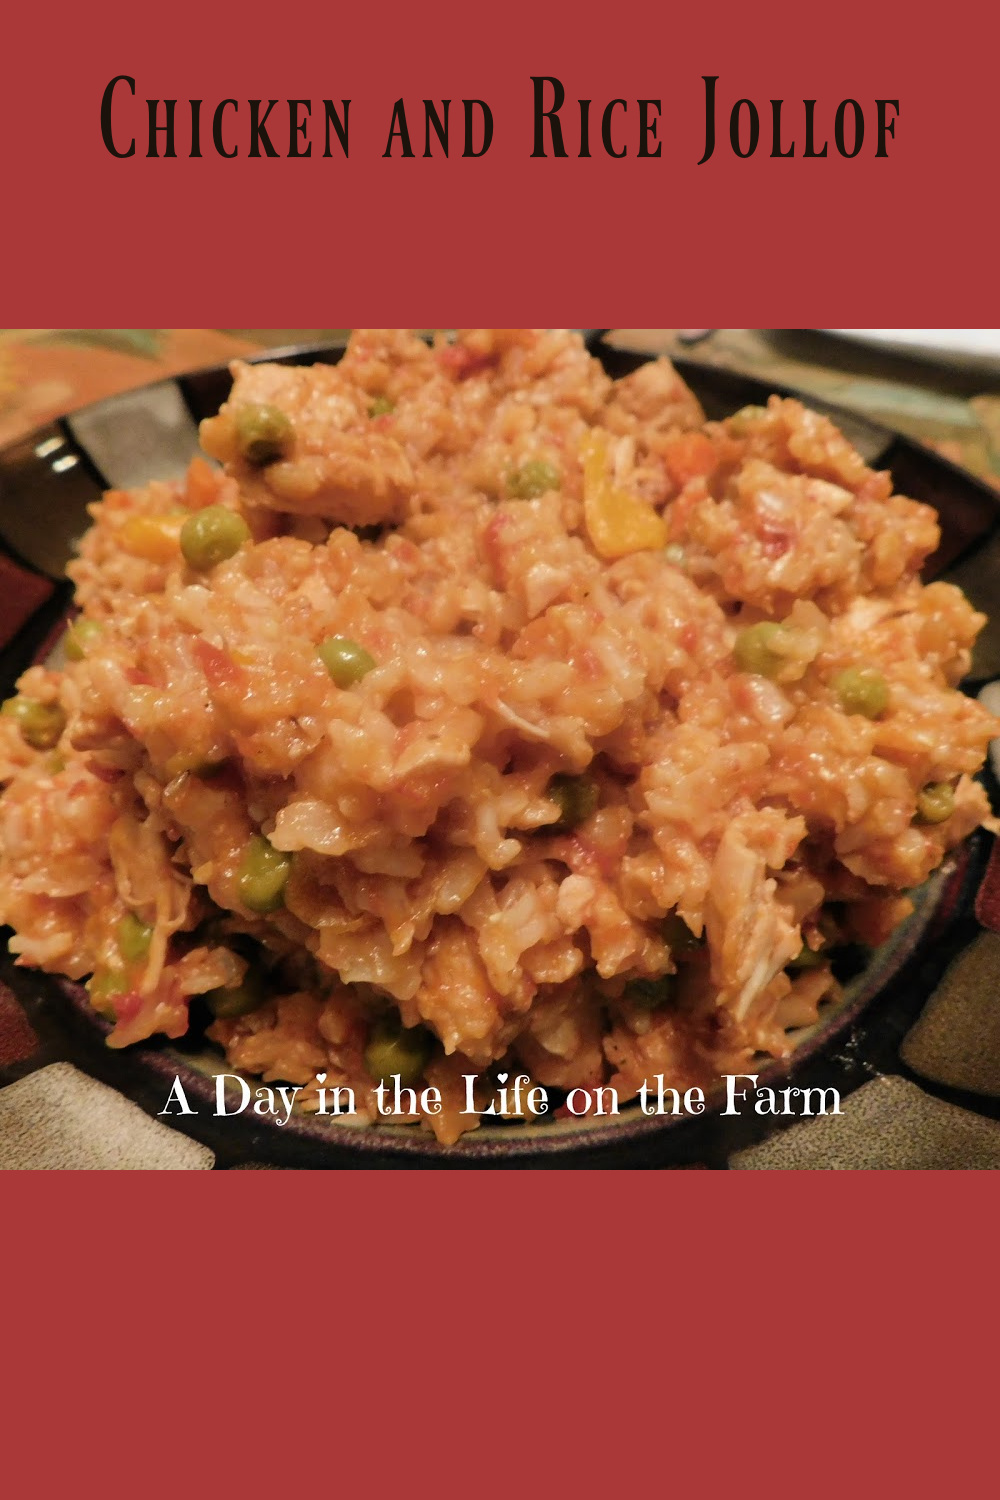 A Day in the Life on the Farm: Chicken and Rice Jollof and a Book Review